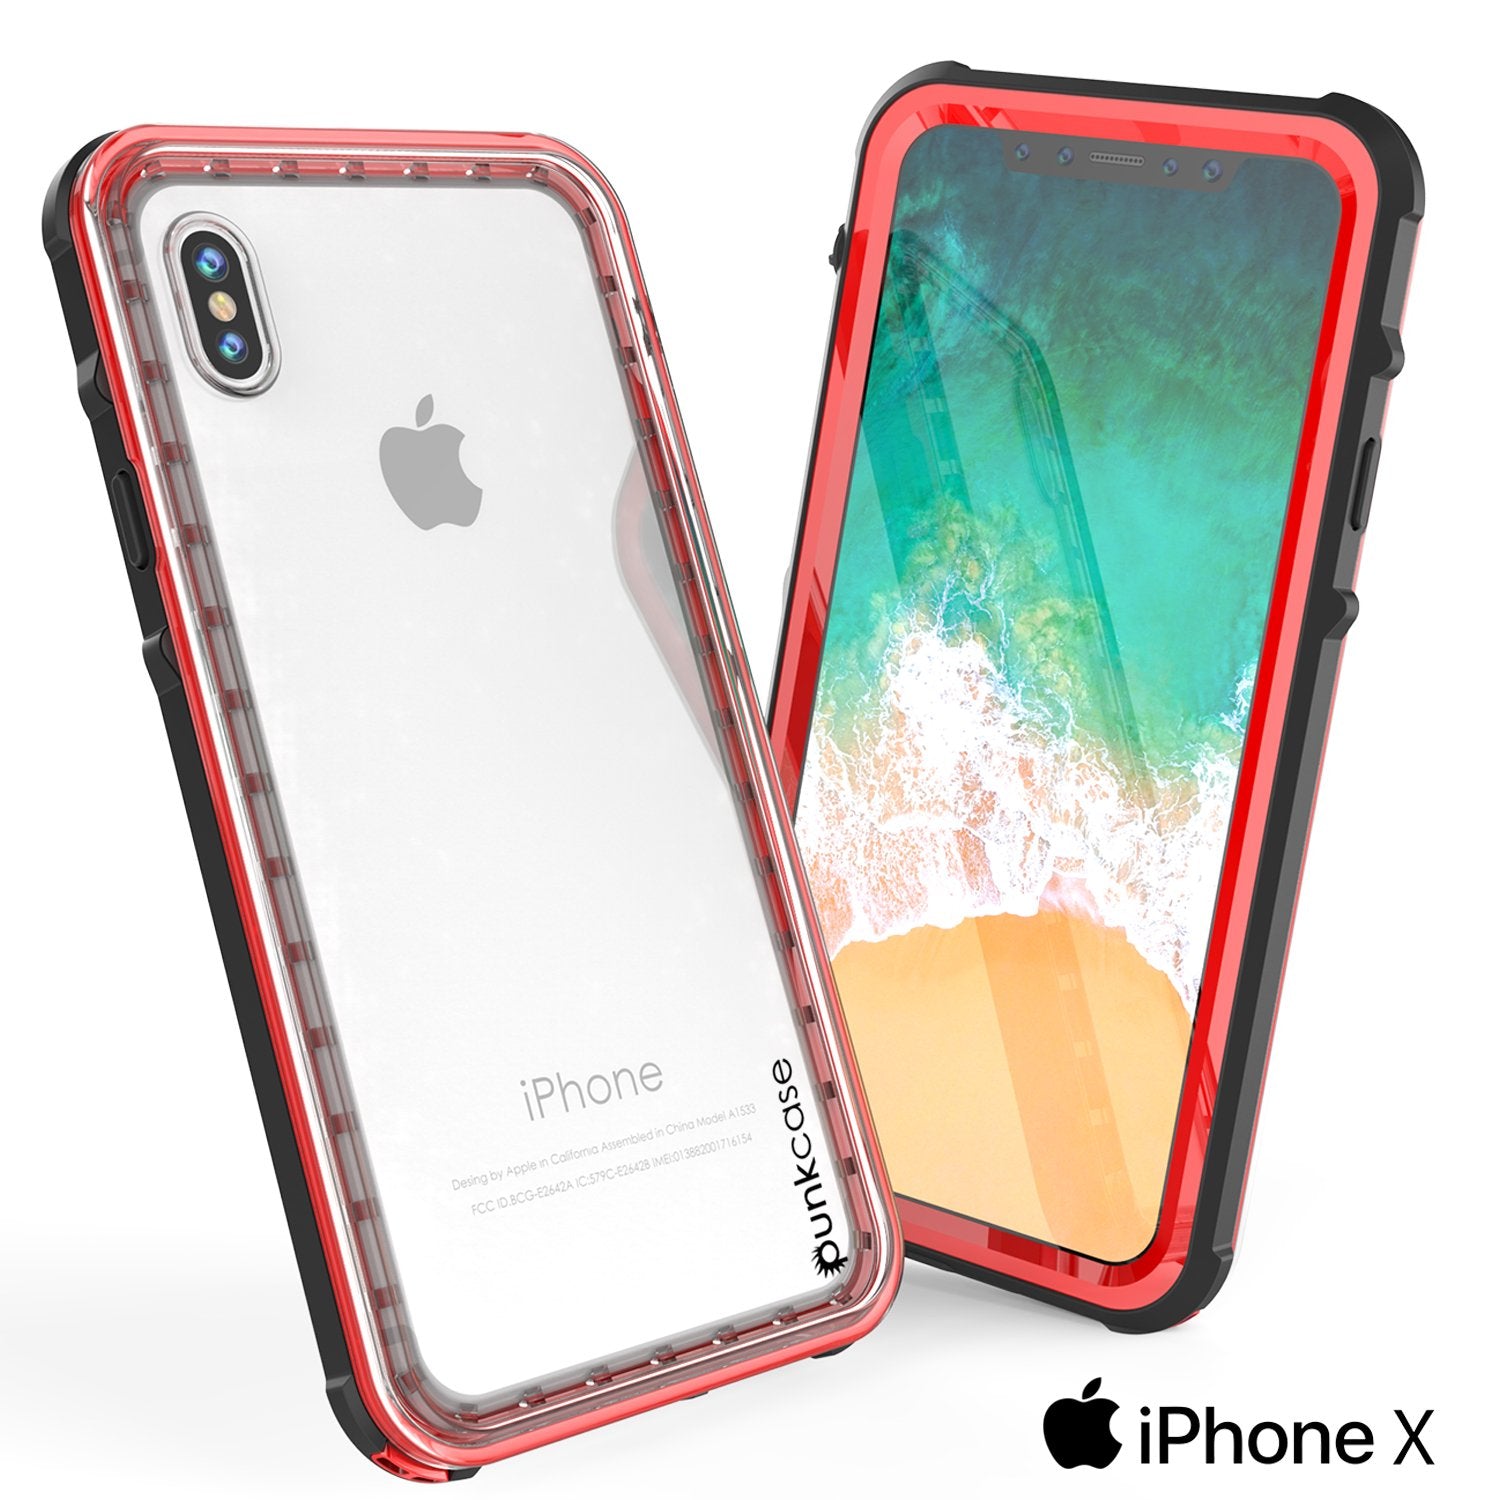 iPhone X Case, PUNKCase [CRYSTAL SERIES] Protective IP68 Certified Cover W/ Attached Screen Protector - DustPROOF, ShockPROOF, SnowPROOF - Ultra Slim Fit for Apple iPhone 10 [RED]